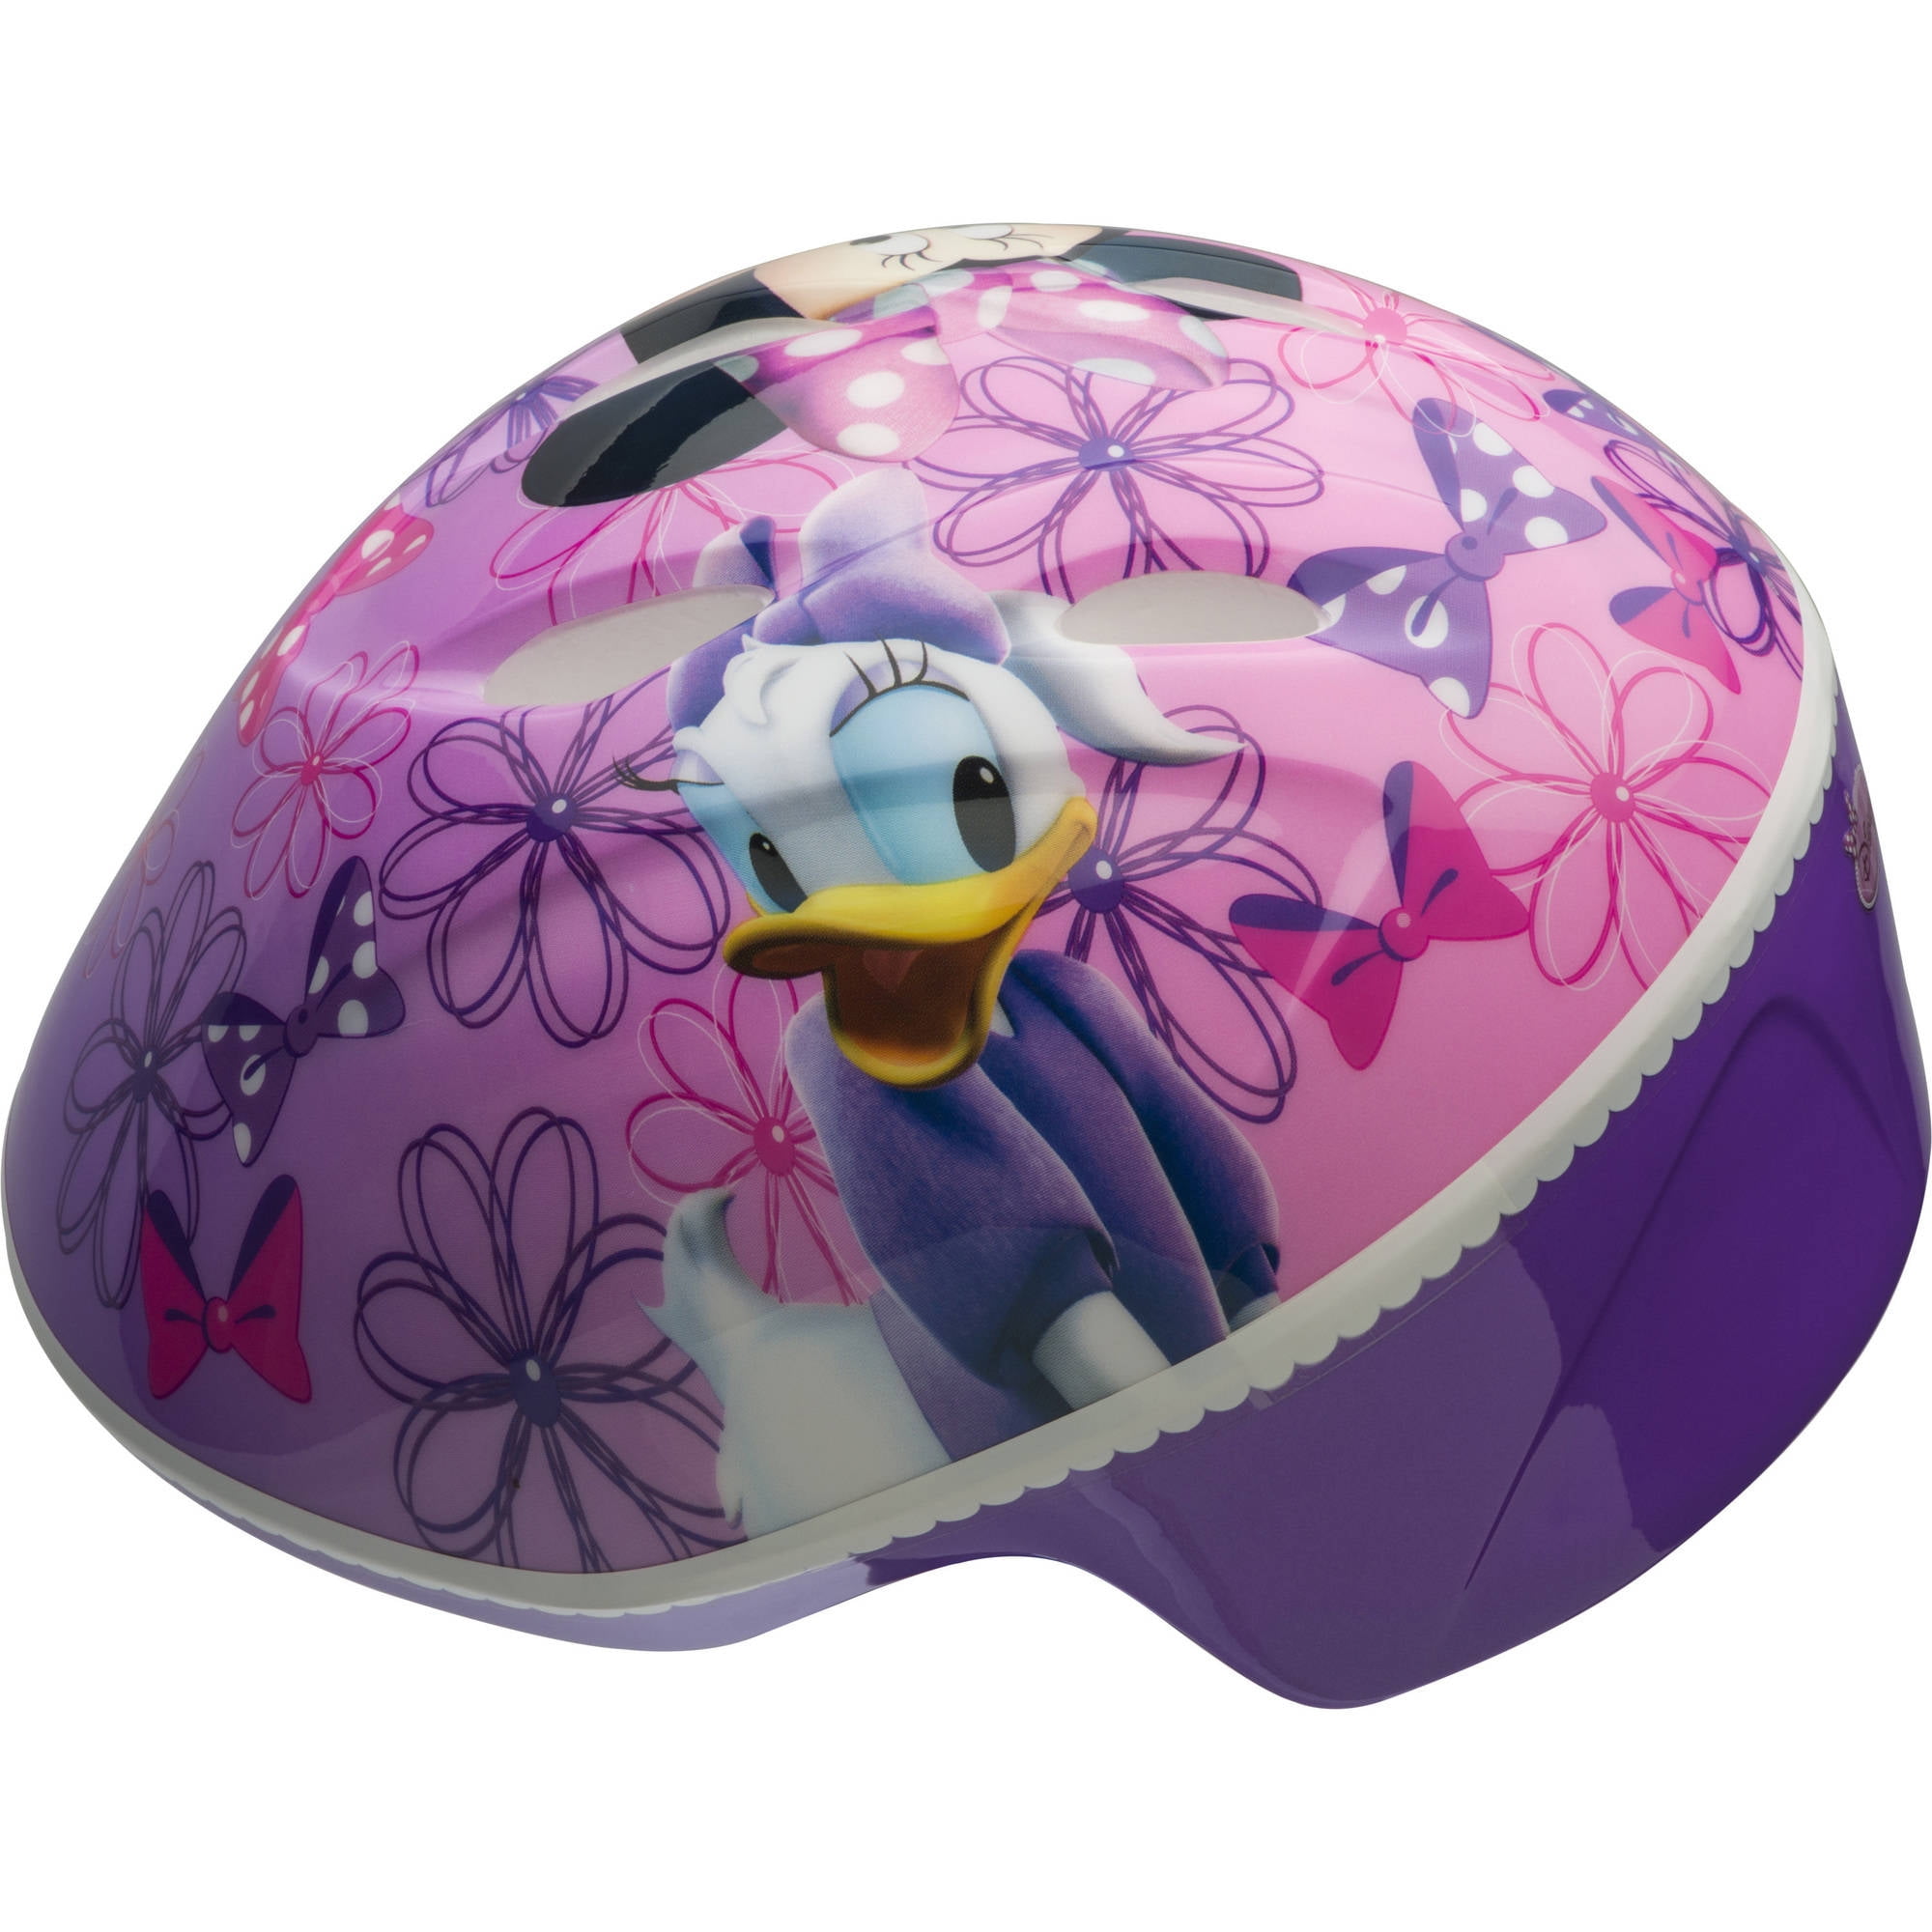 Details about   Bell Disney MINNIE MOUSE BICYCLE HELMET Pink & Teal Glitter Graphics Toddler 3+ 